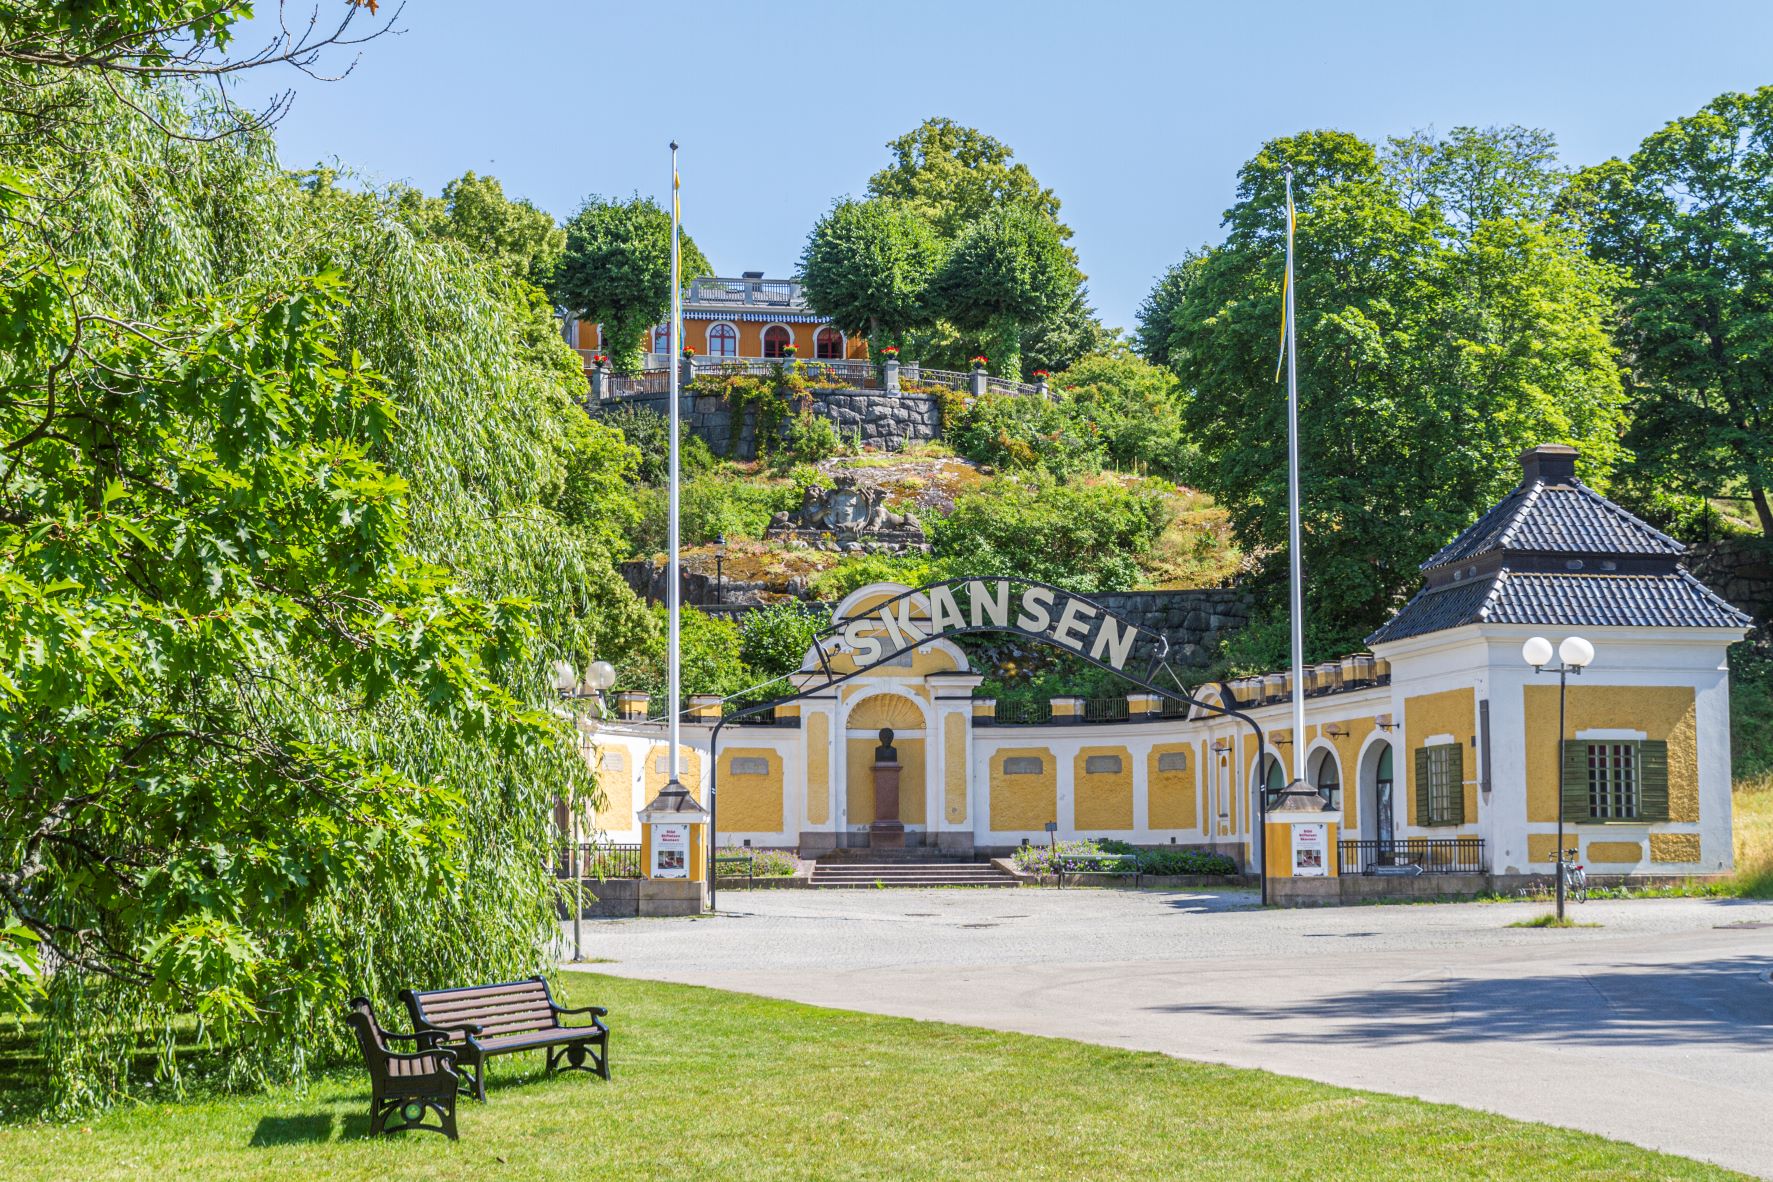 © Skansen, Image: Jonathan Lundkvist Picture of the entrance to an open-air museum. The entrance is yellow and surrounded by green trees.